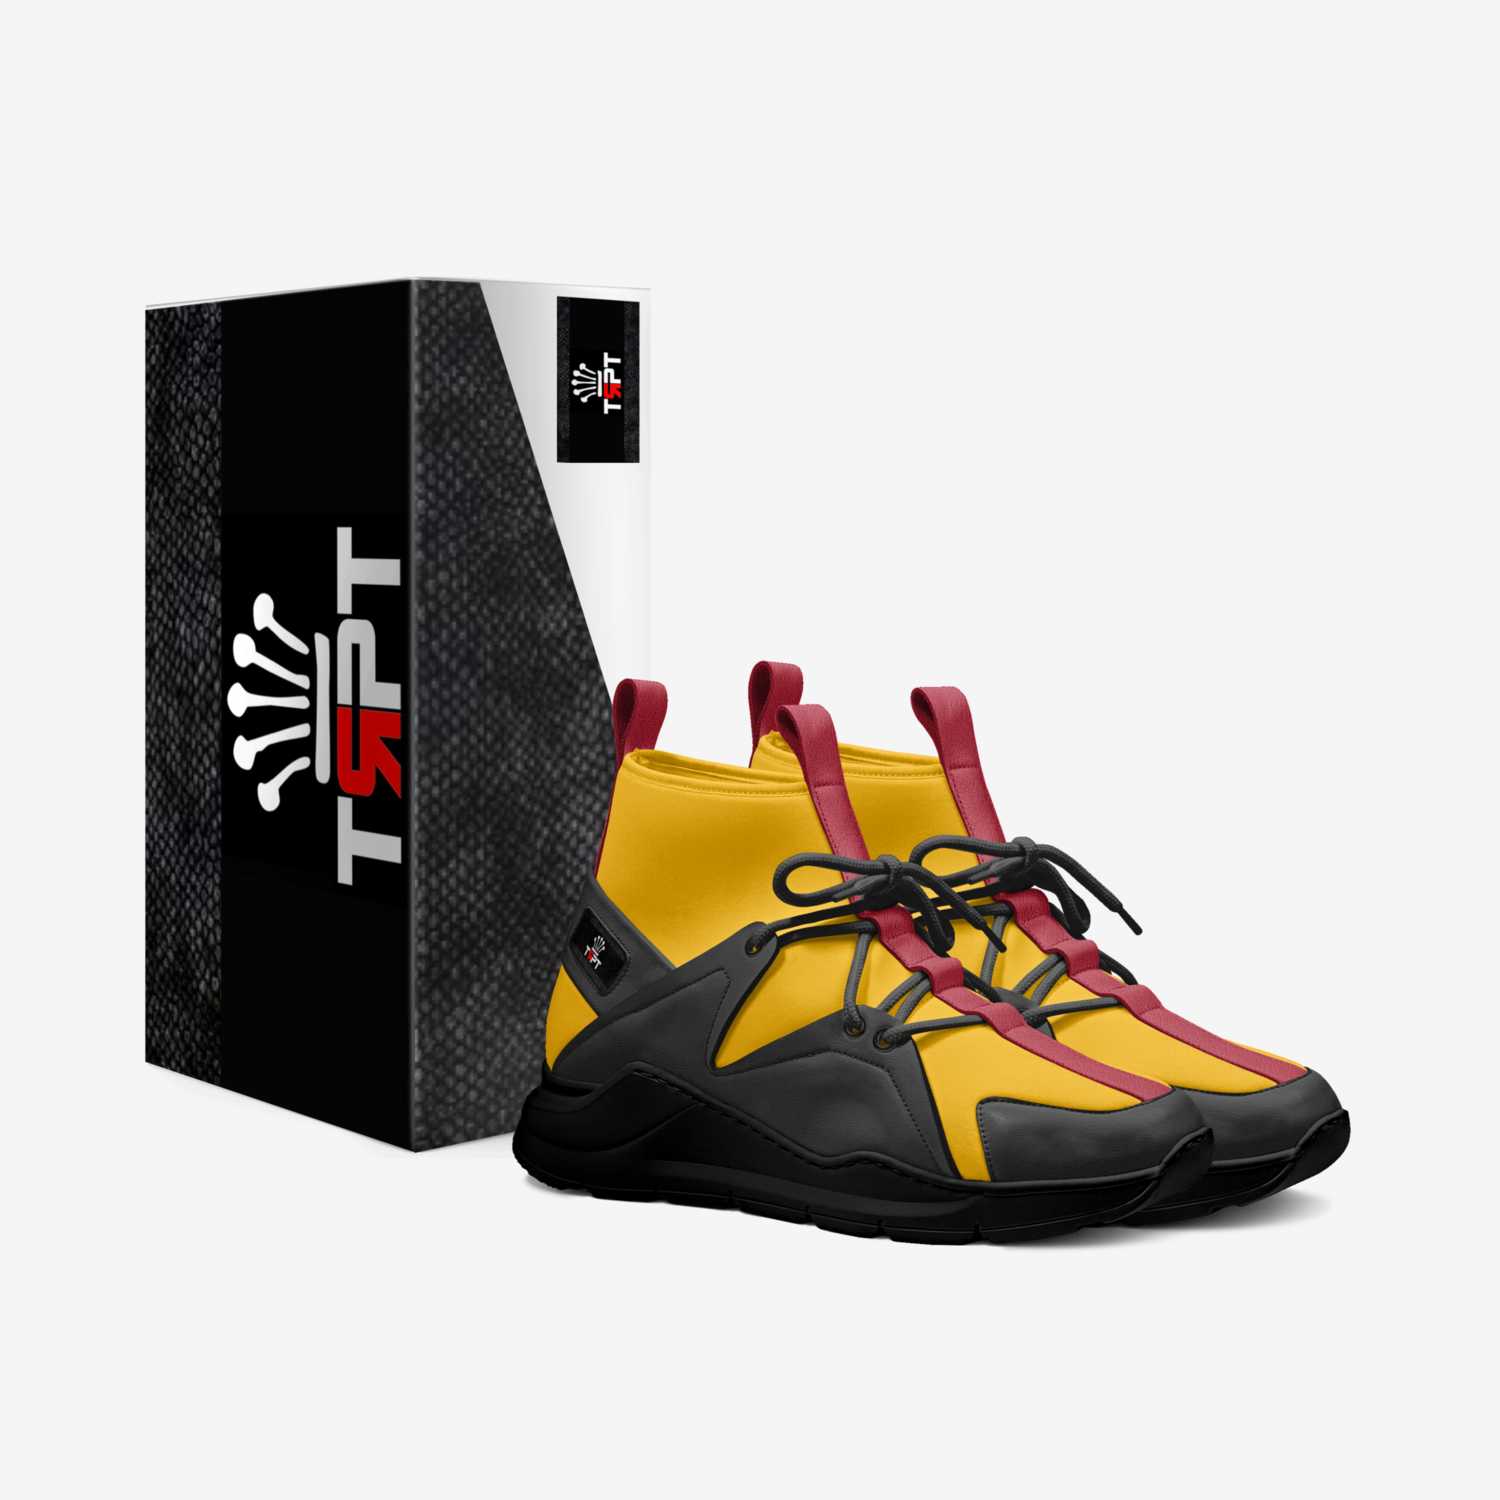 Kung Fu 808 custom made in Italy shoes by Dorian Hall | Box view